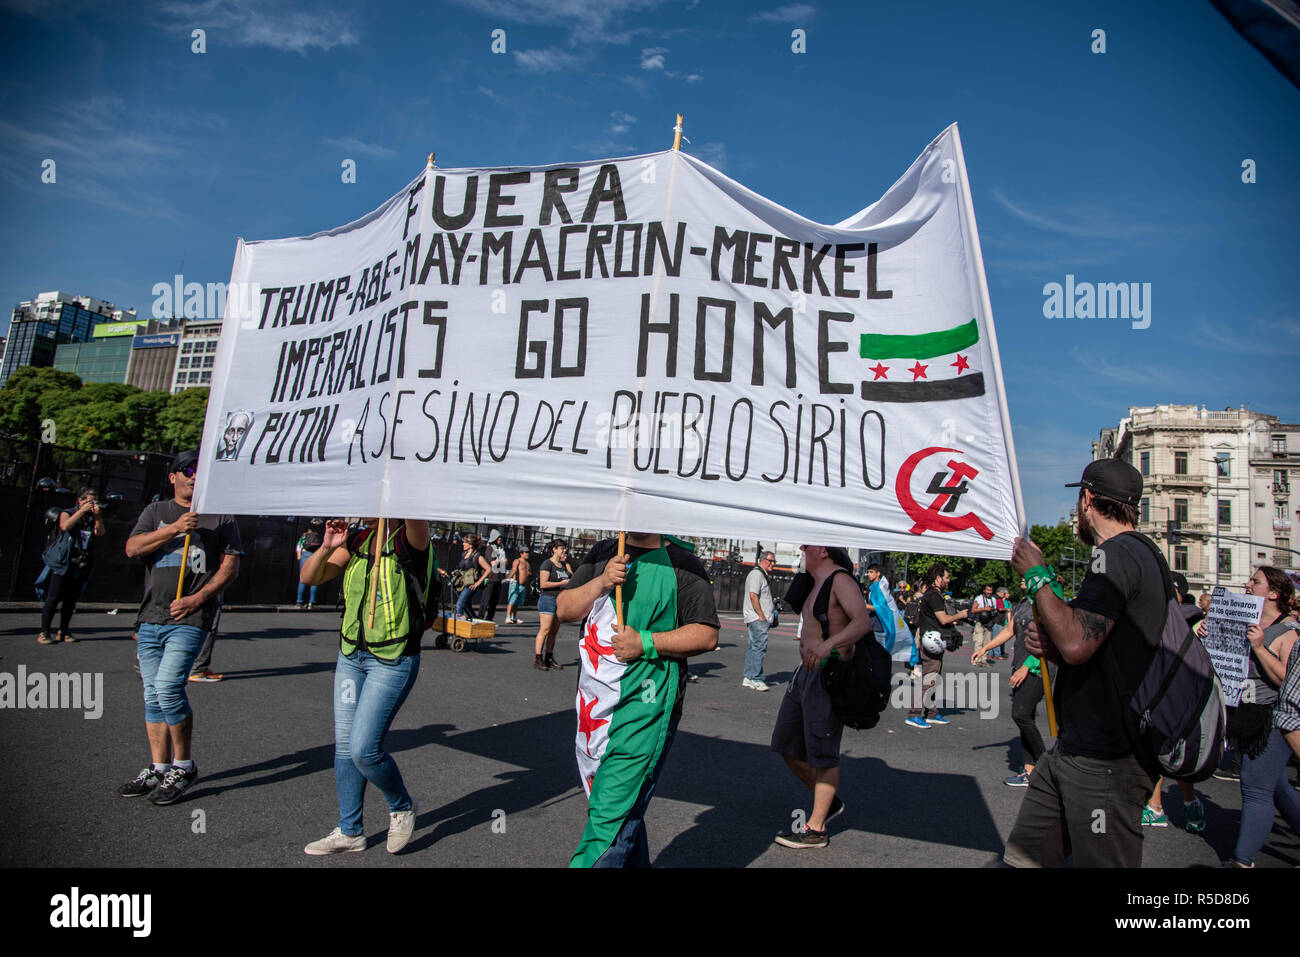 Buenos Aires, Argentina. 30th Nov, 2018. Nov 30, 2018 - Buenos Aires, Argentina - Hundreds of thousands of anti-capitalist and other protesters marched through the Argentine capital Buenos Aires on Friday against the G20 summit. Credit: Maximiliano Ramos/ZUMA Wire/Alamy Live News Stock Photo